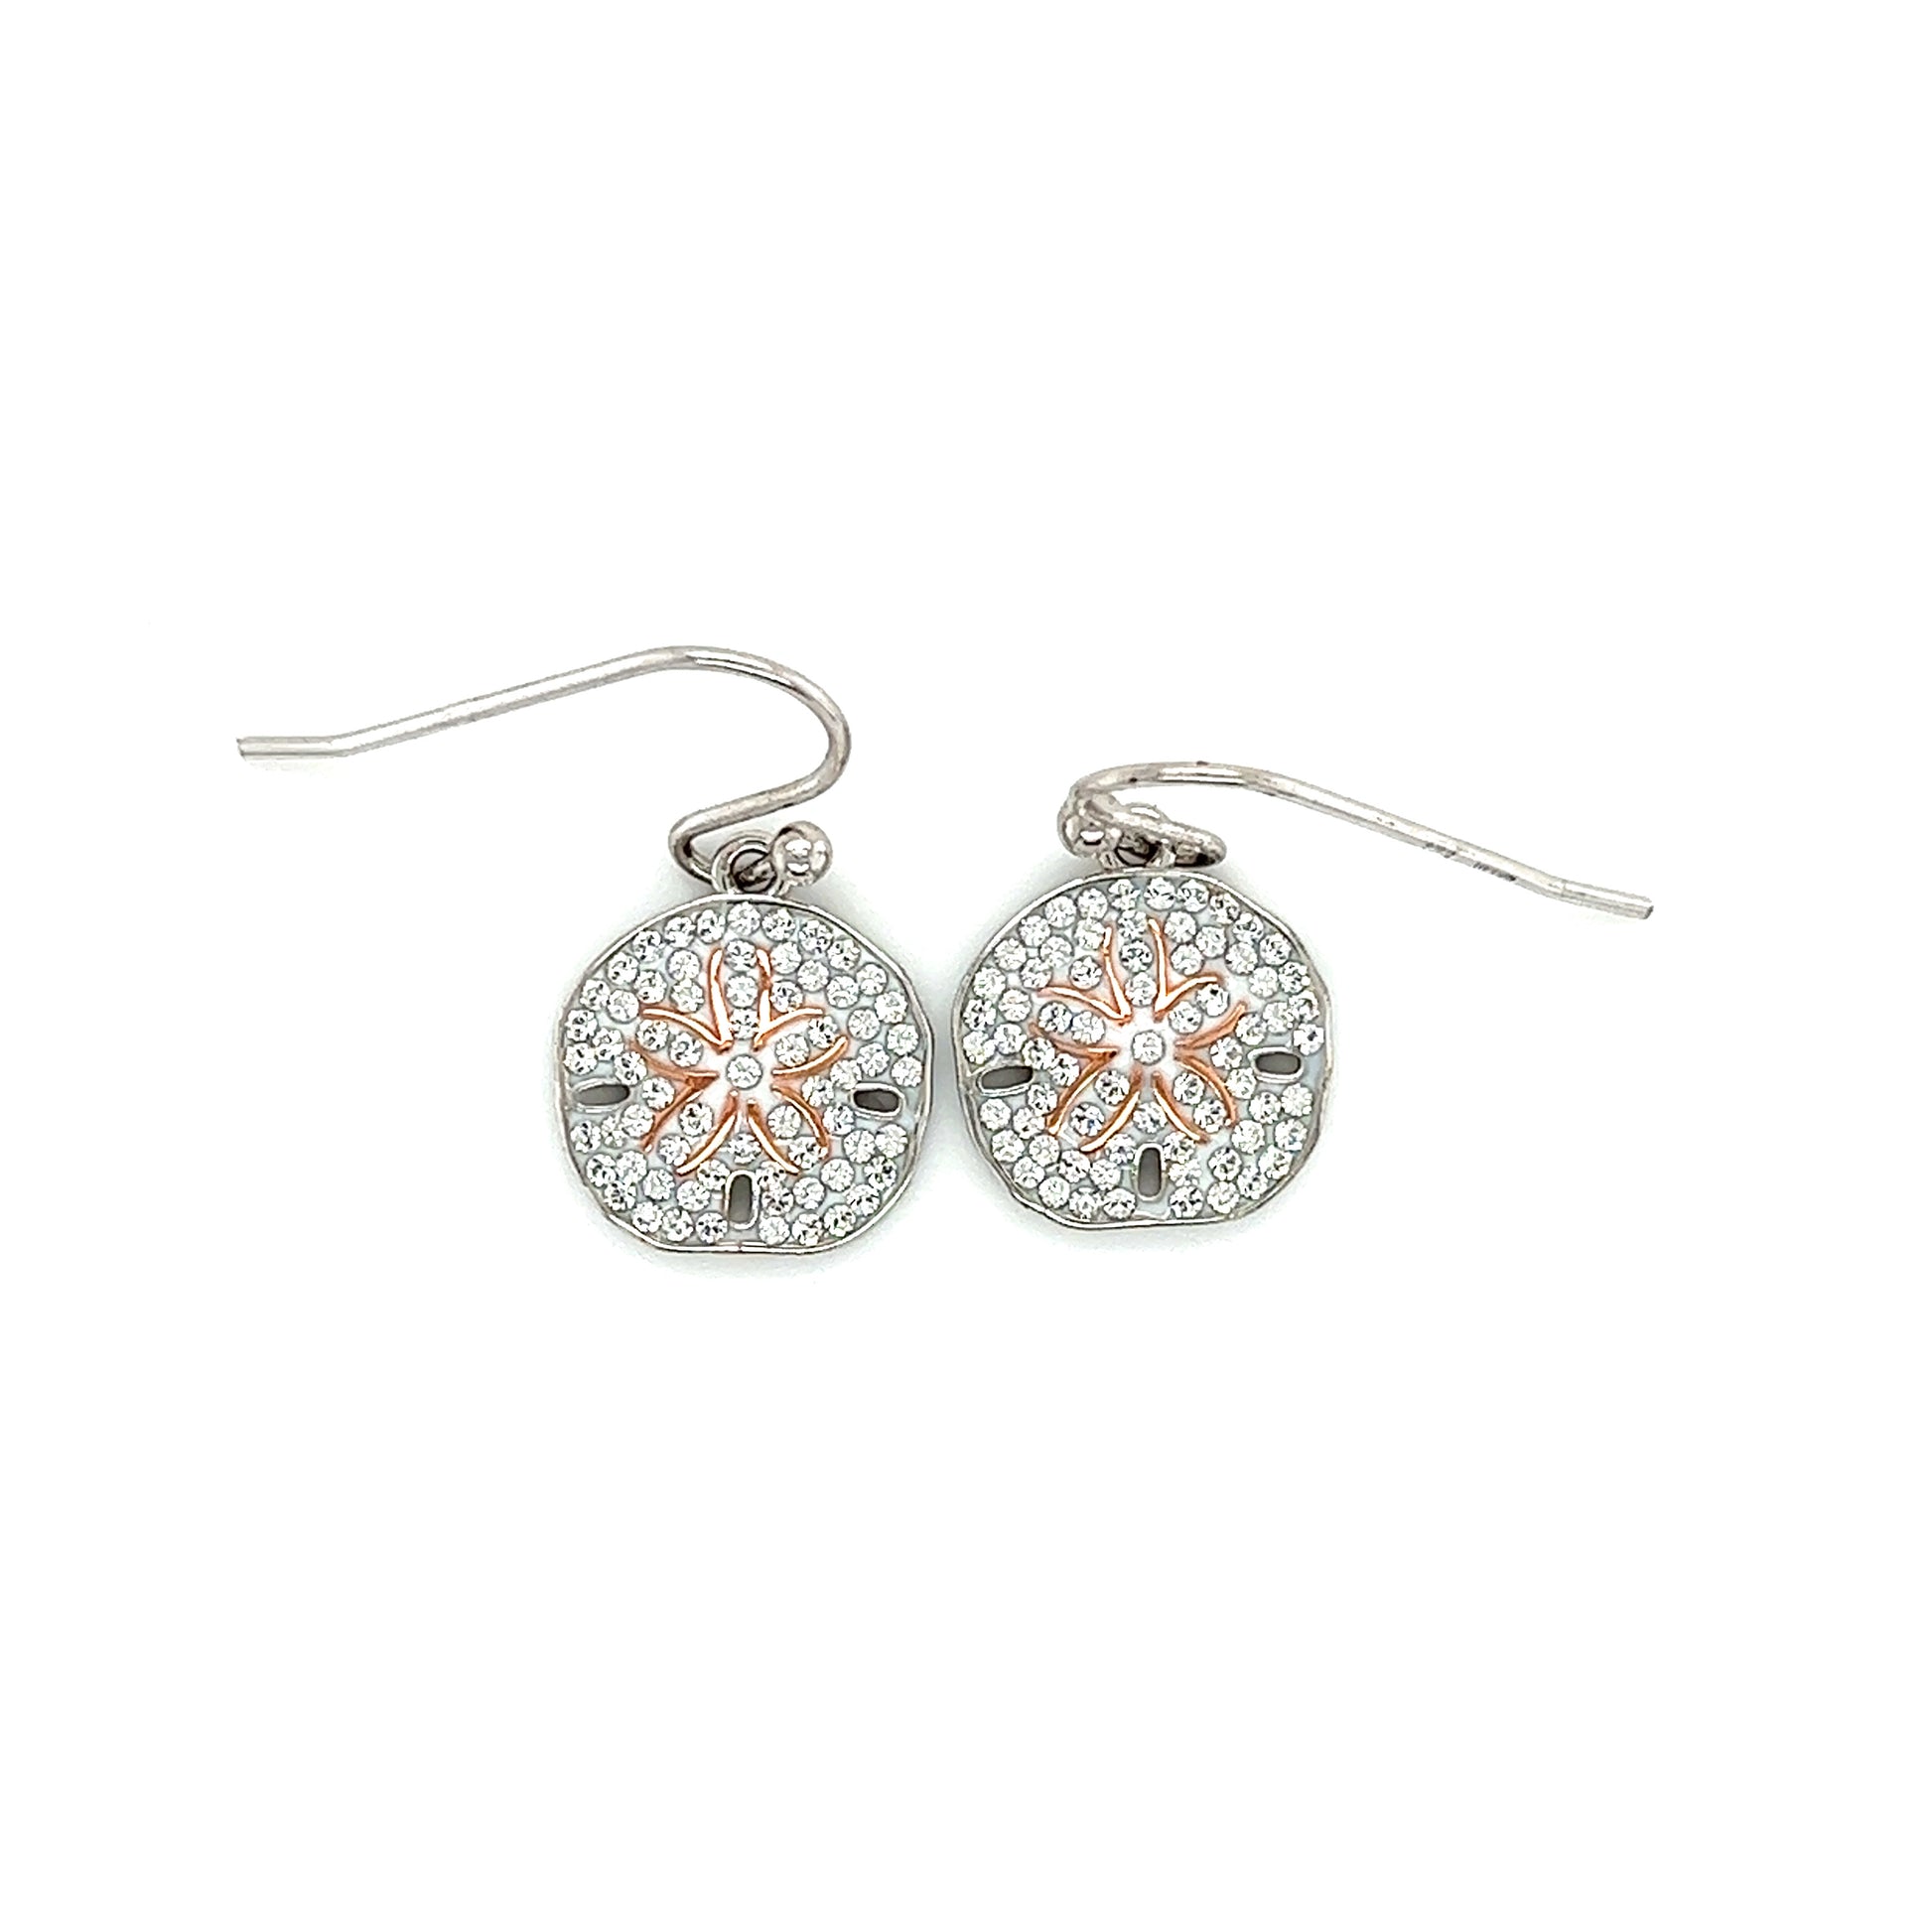 Sand Dollar Dangle Earrings with White Crystals in Sterling Silver Top View